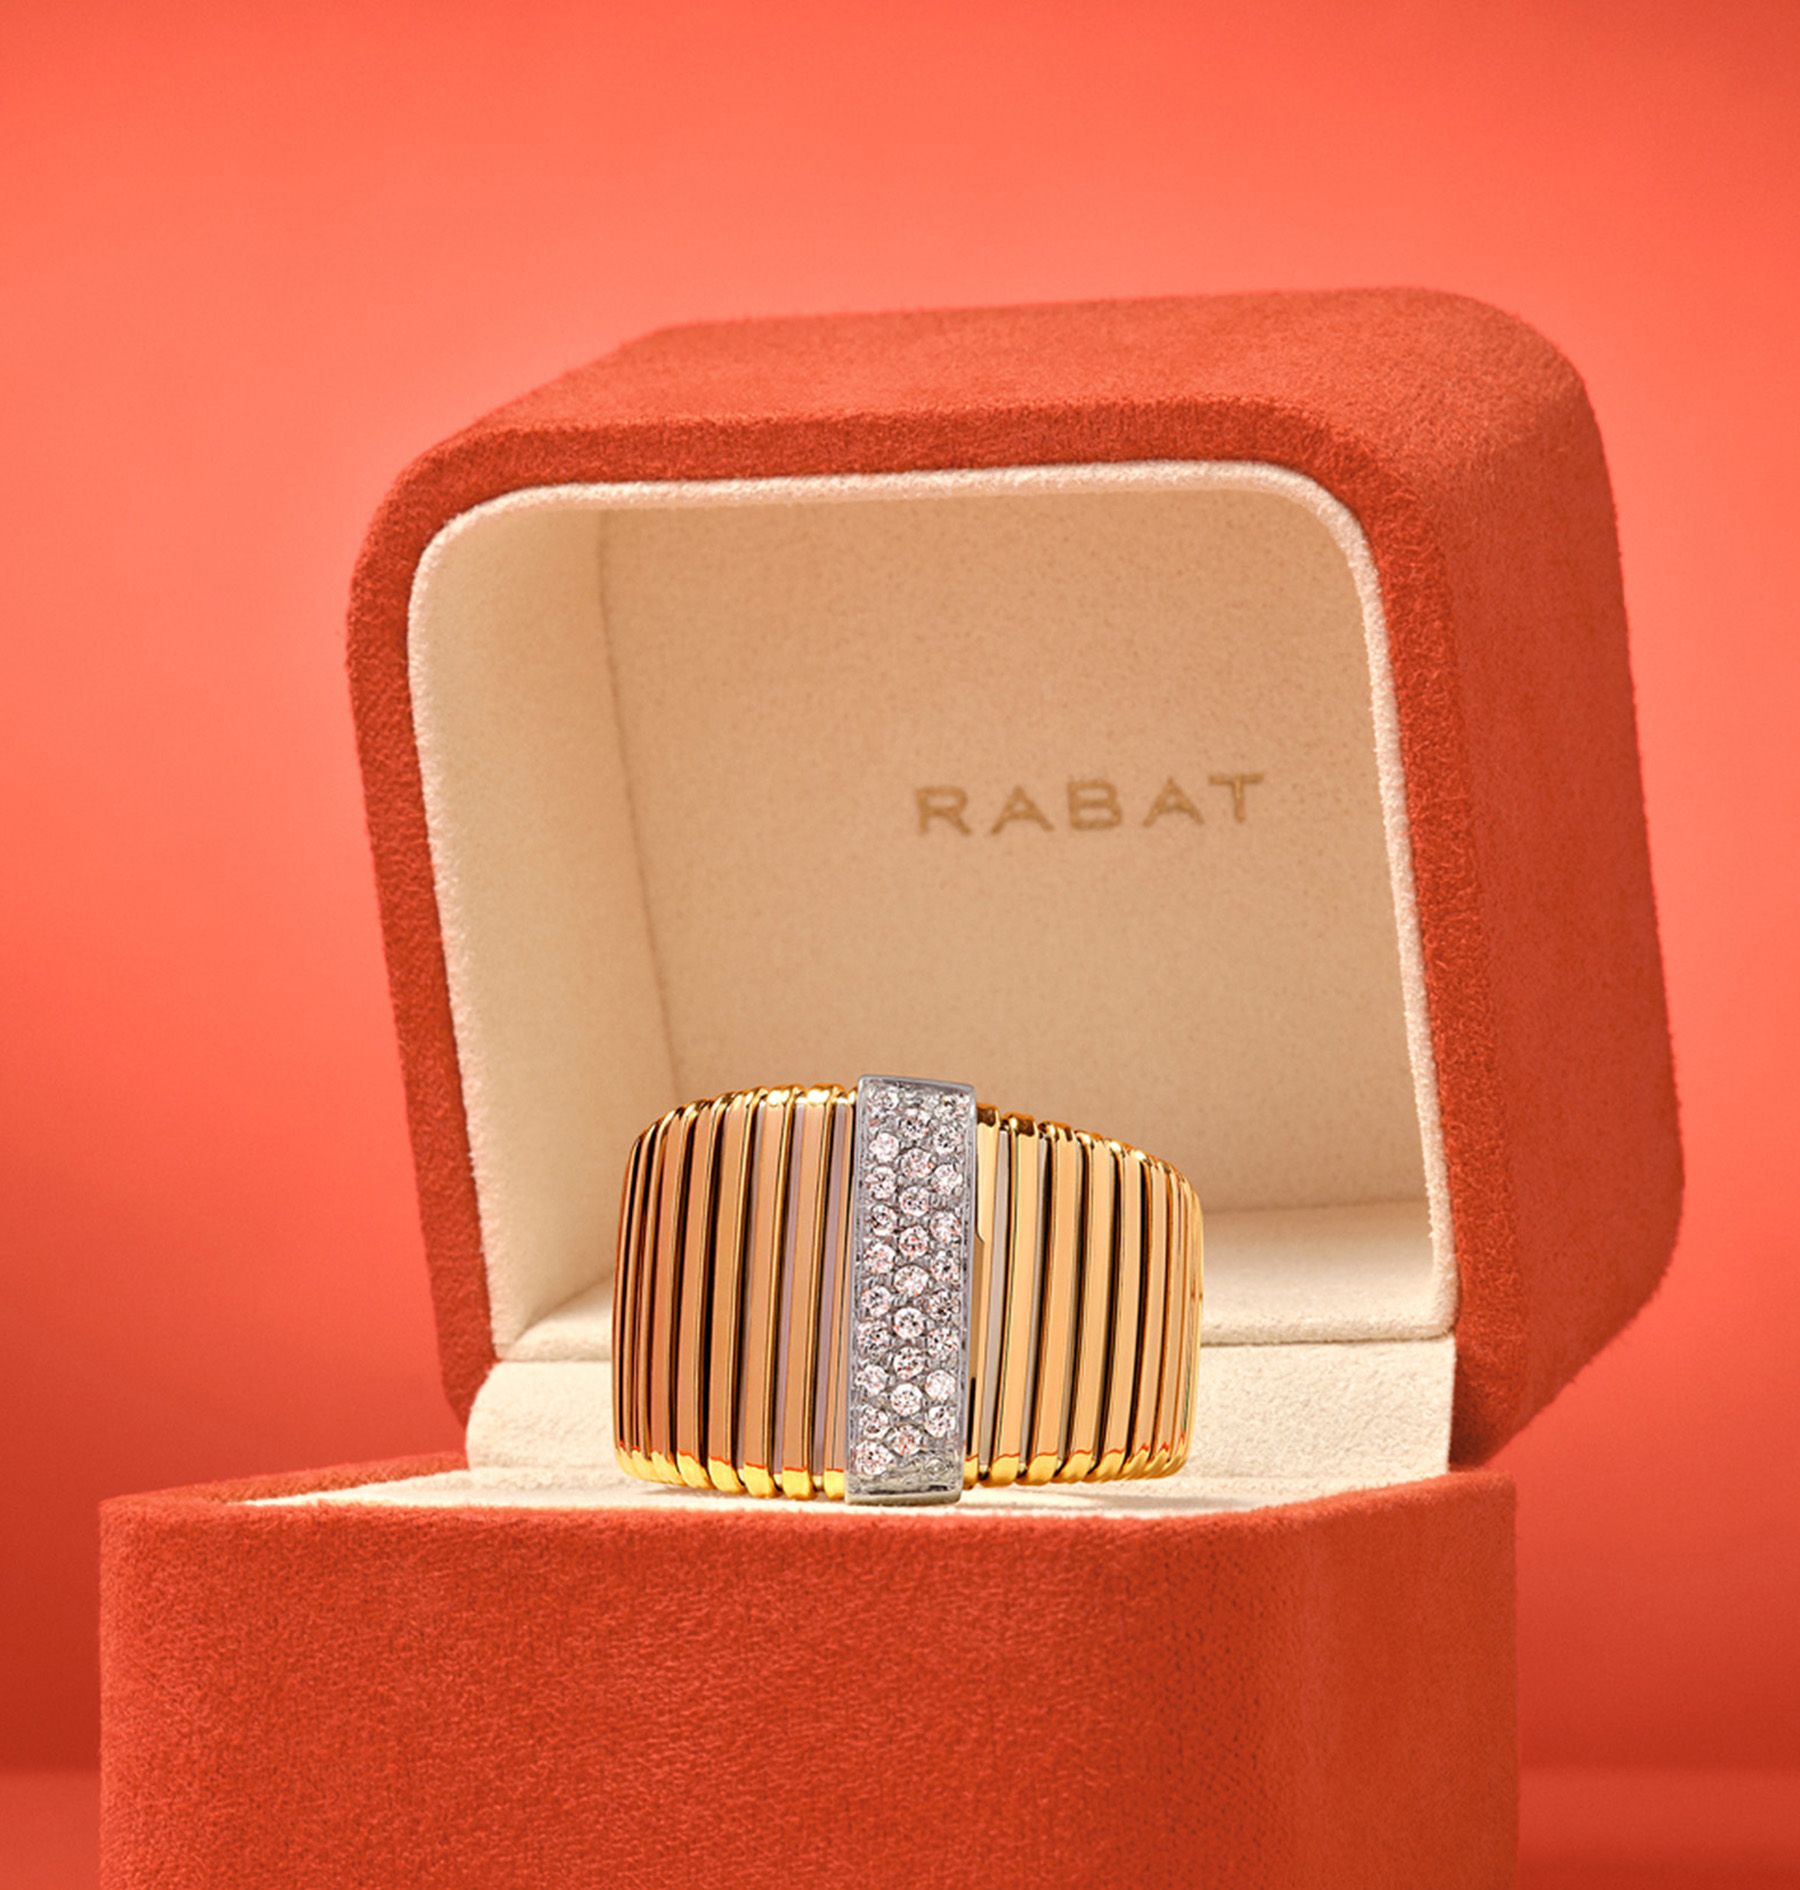 Evergold Jewels Collection at RABAT Jewelry